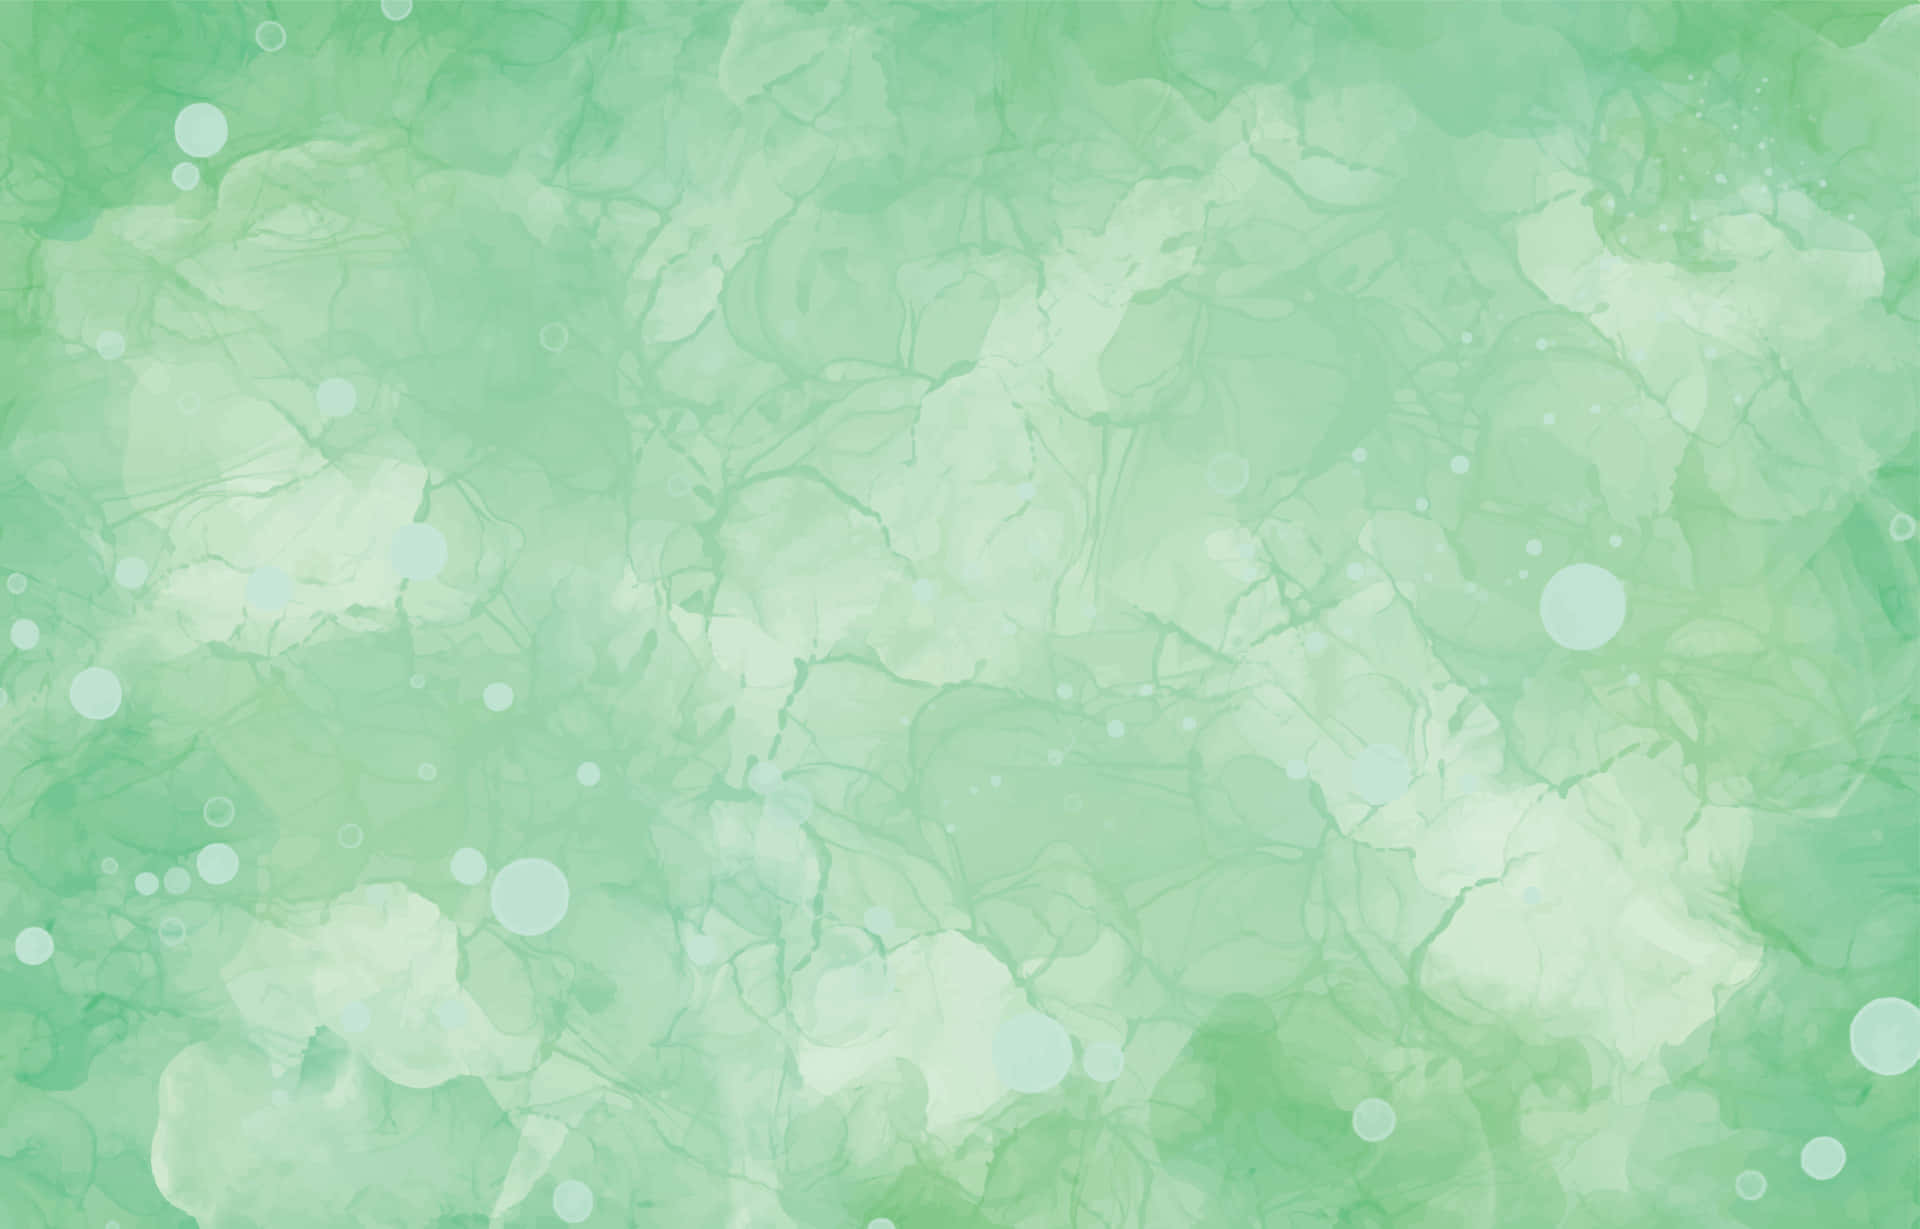 Green Watercolor Background With Bubbles